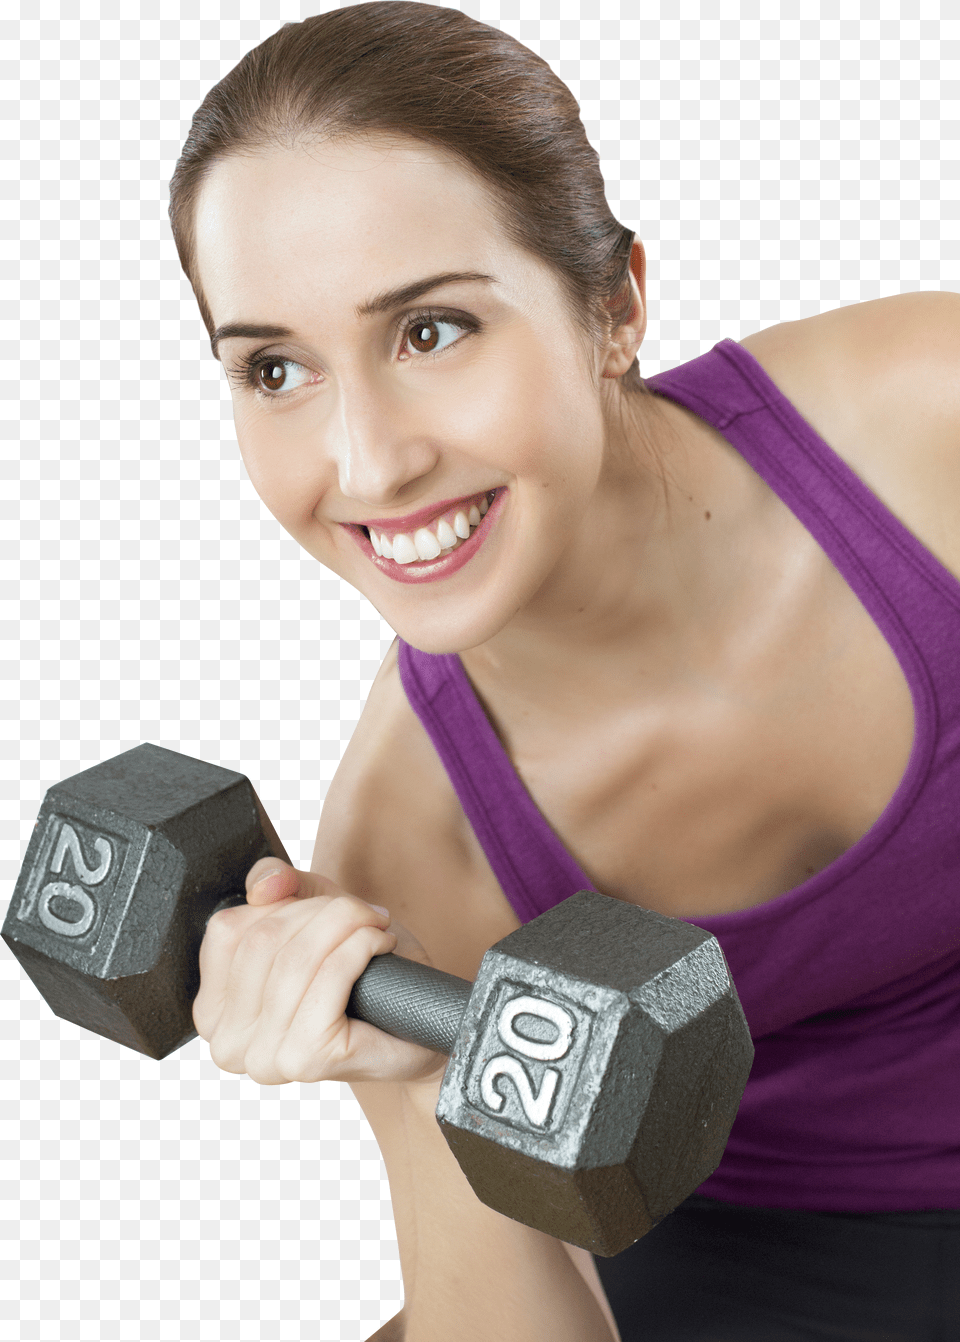 Fitness Images Free Transparent Png